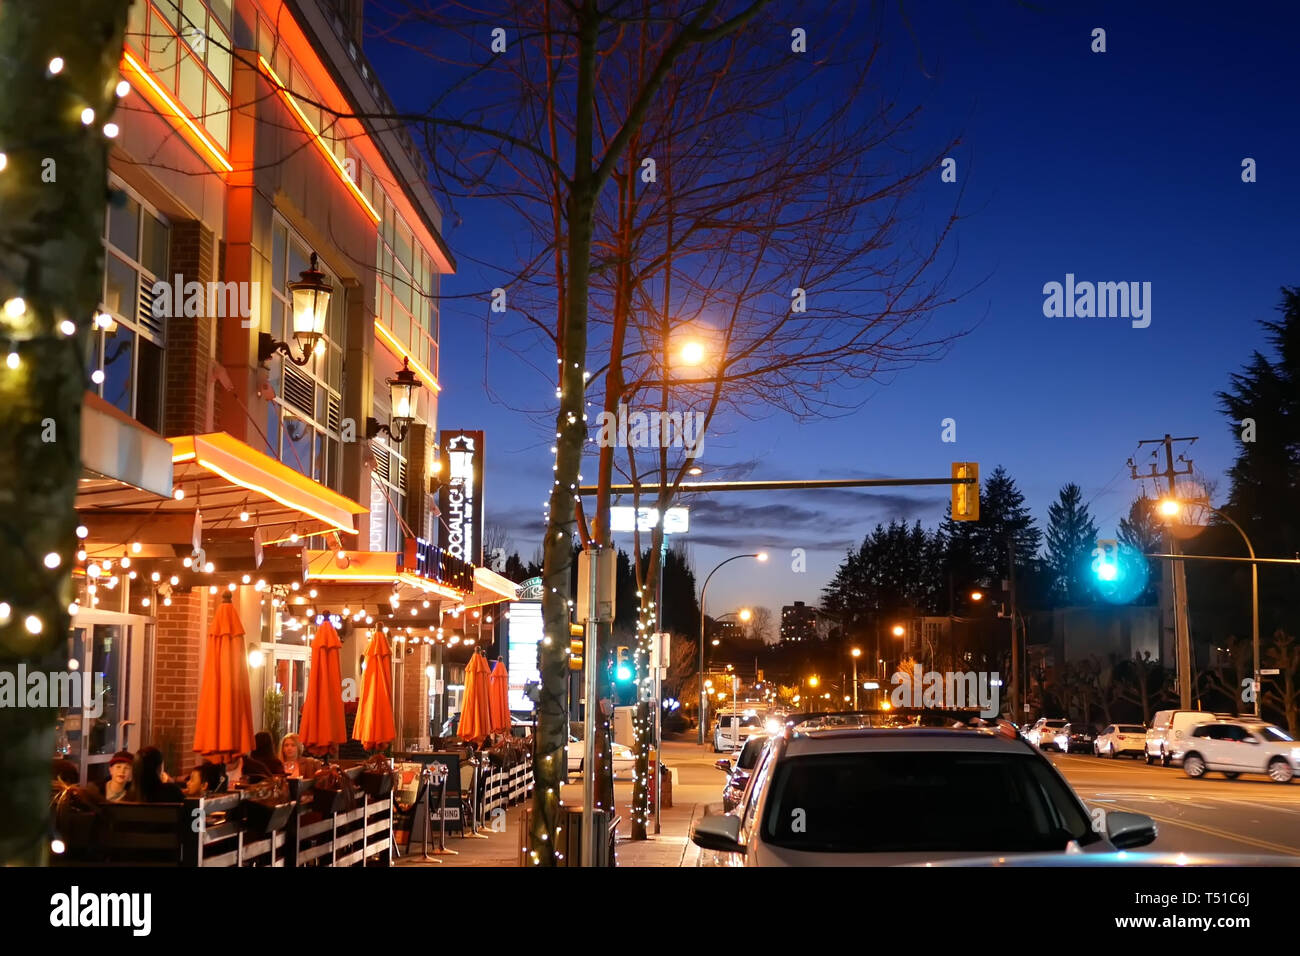 Coquitlam, BC, Canada - March 20, 2019 : Outside shot of Browns socialhouse restaurant at night Stock Photo